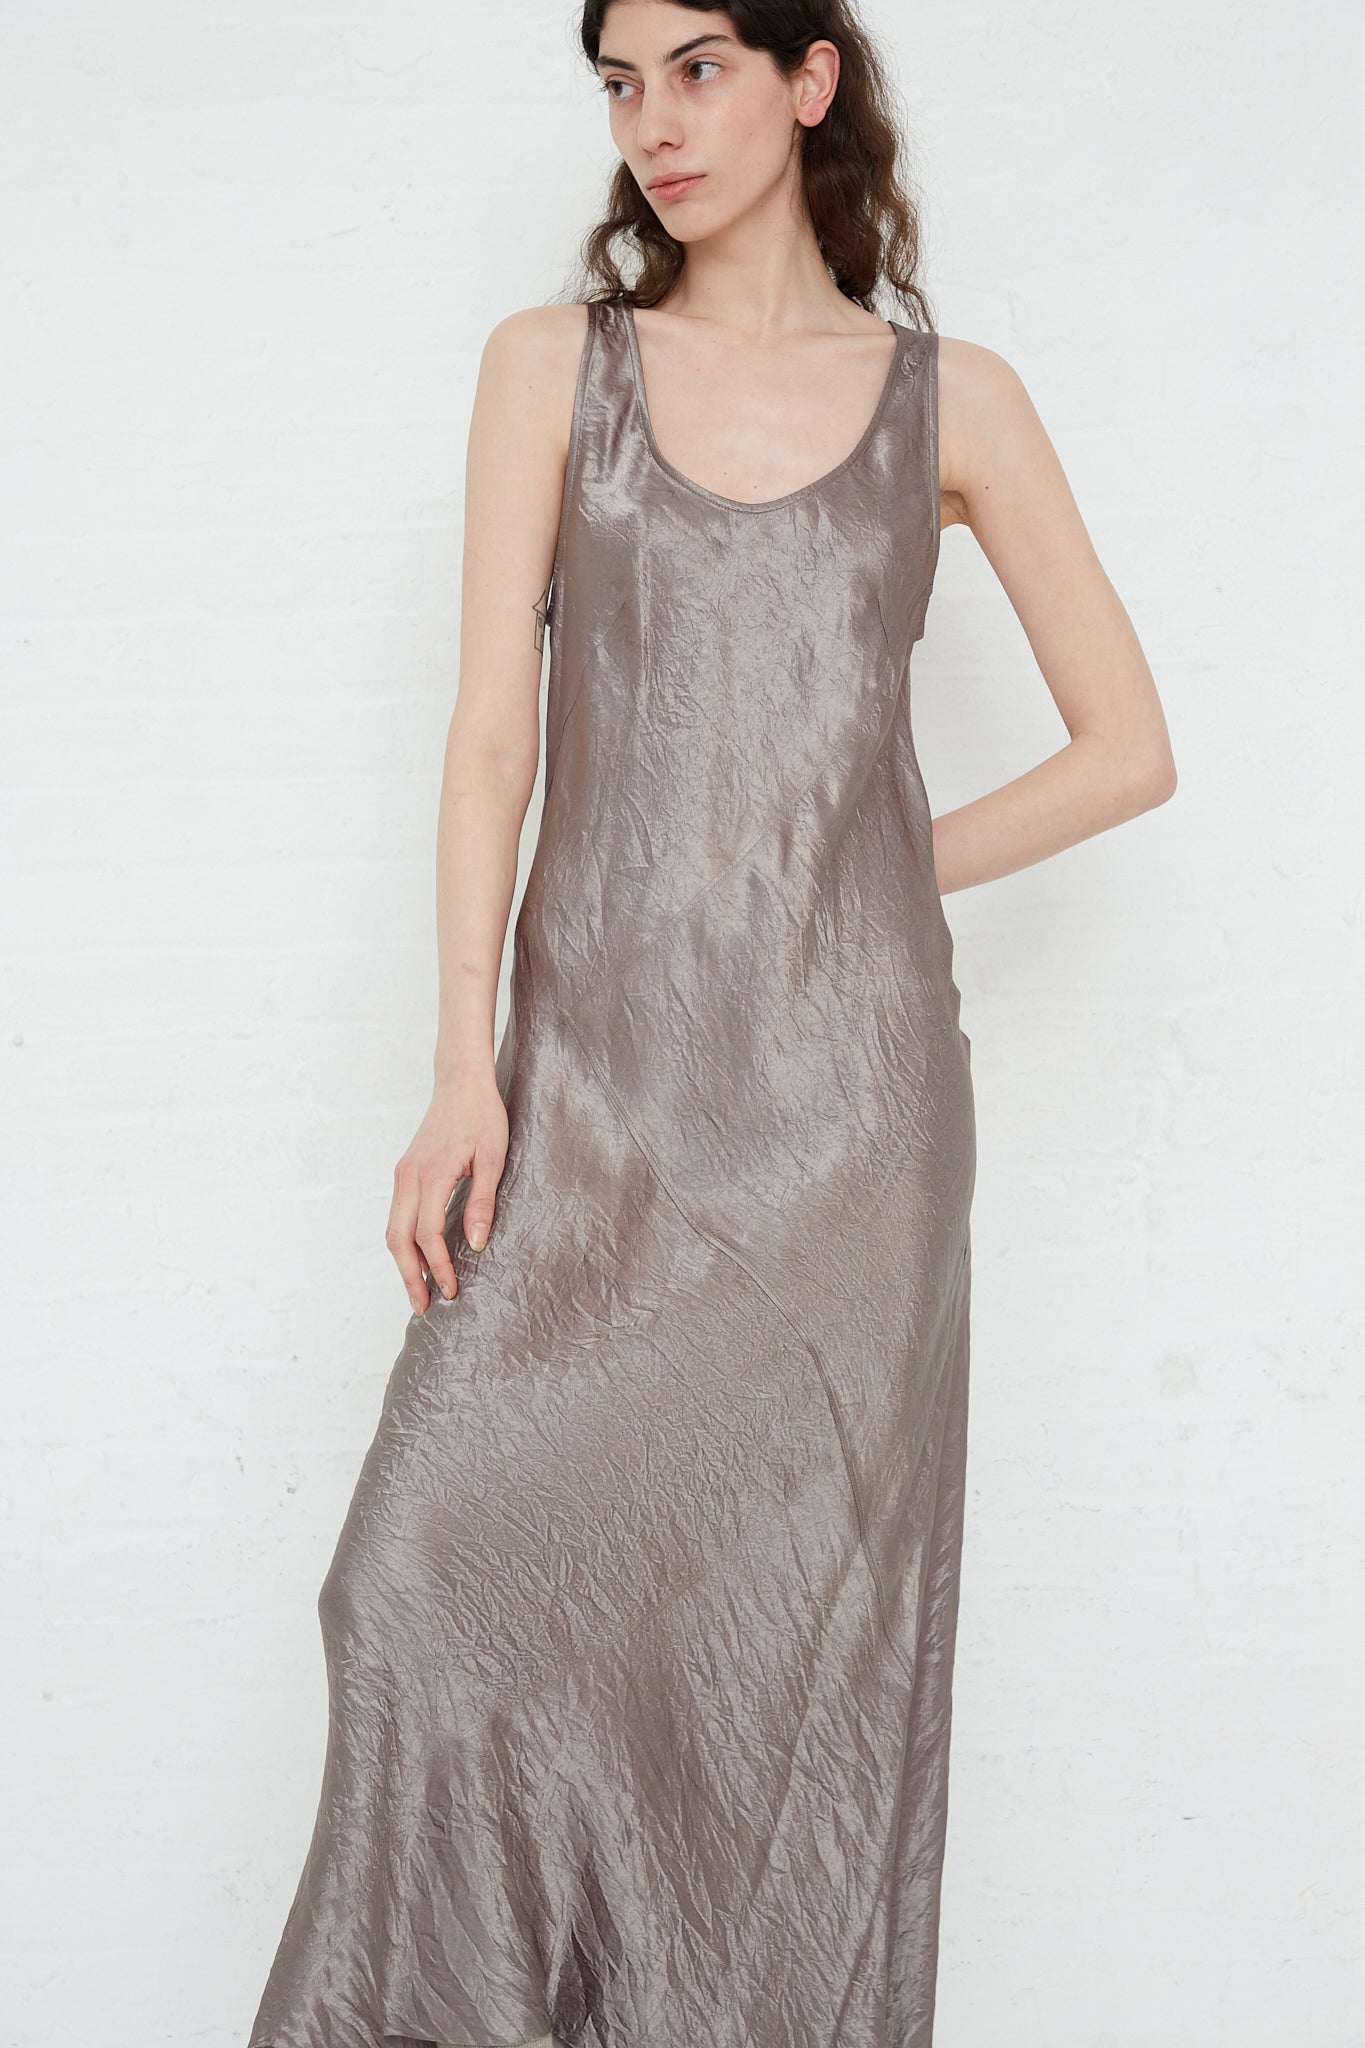 A woman wearing a long sleeveless Luster Bias Dress in Laurel by Lauren Manoogian, made of silver metallic maxi dress with a soft sheen rayon fabric.